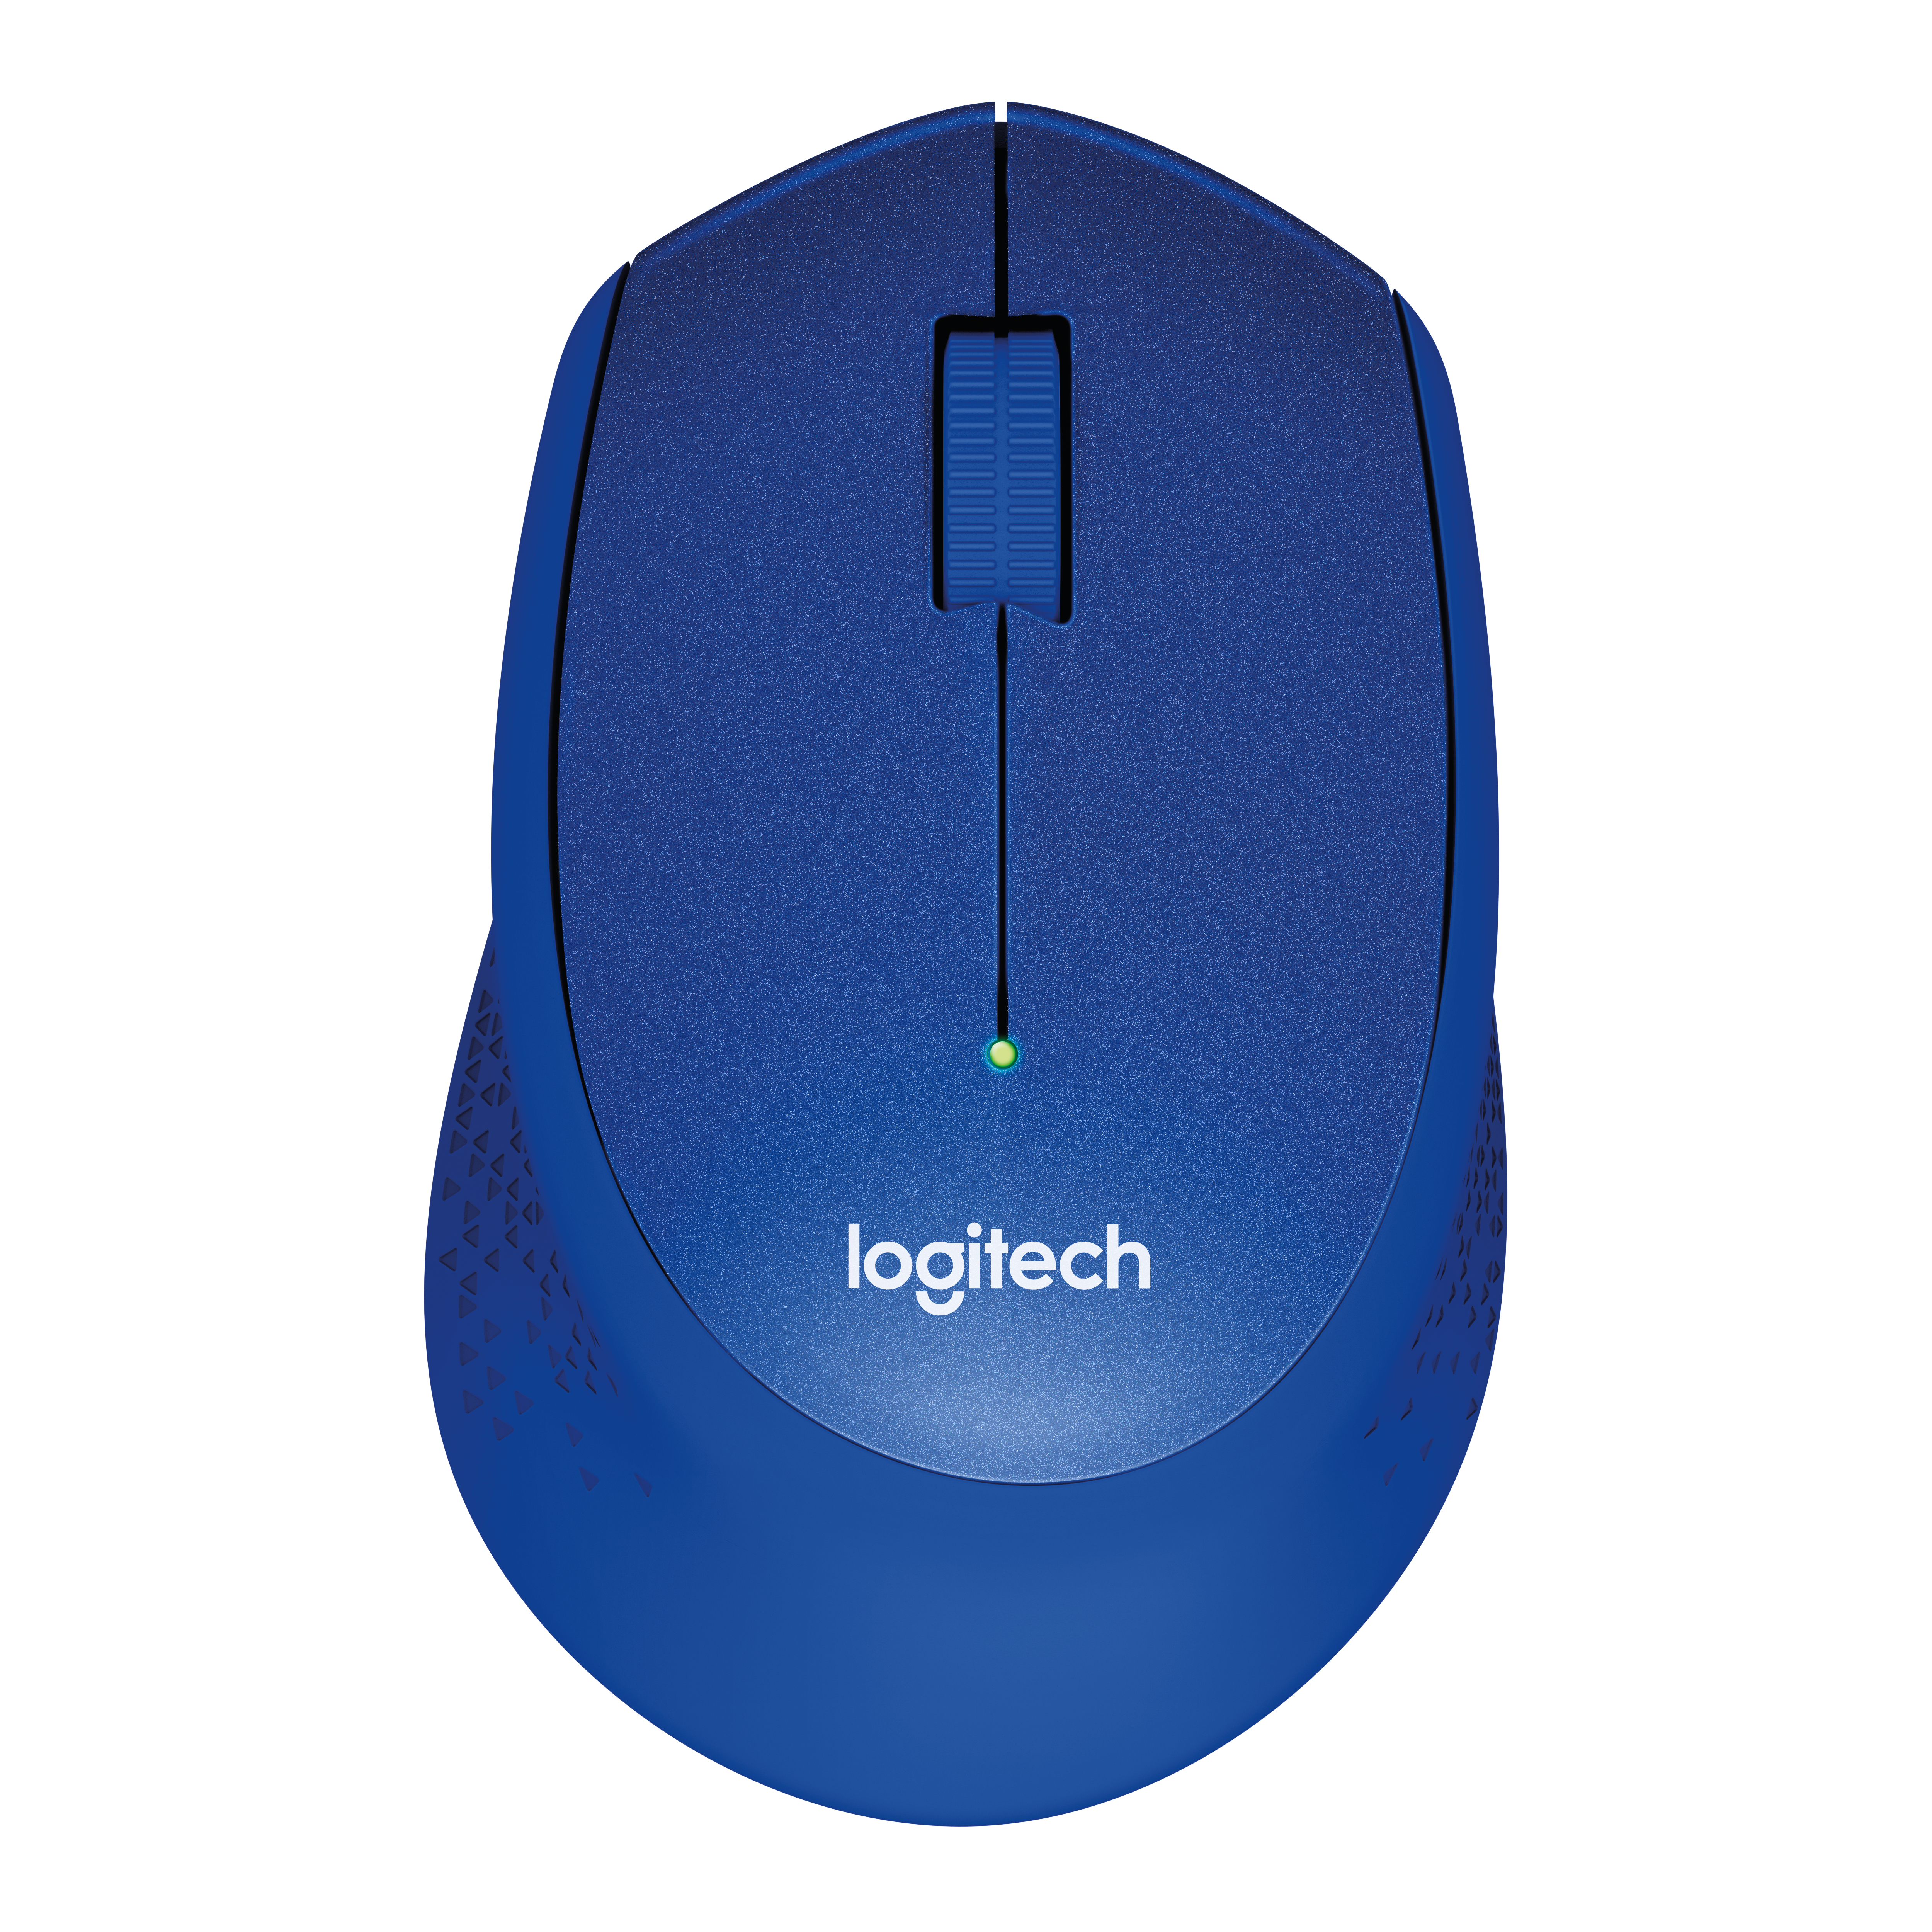 Logitech 910-004910 M330 SILENT PLUS Wireless Gaming Mouse Blue